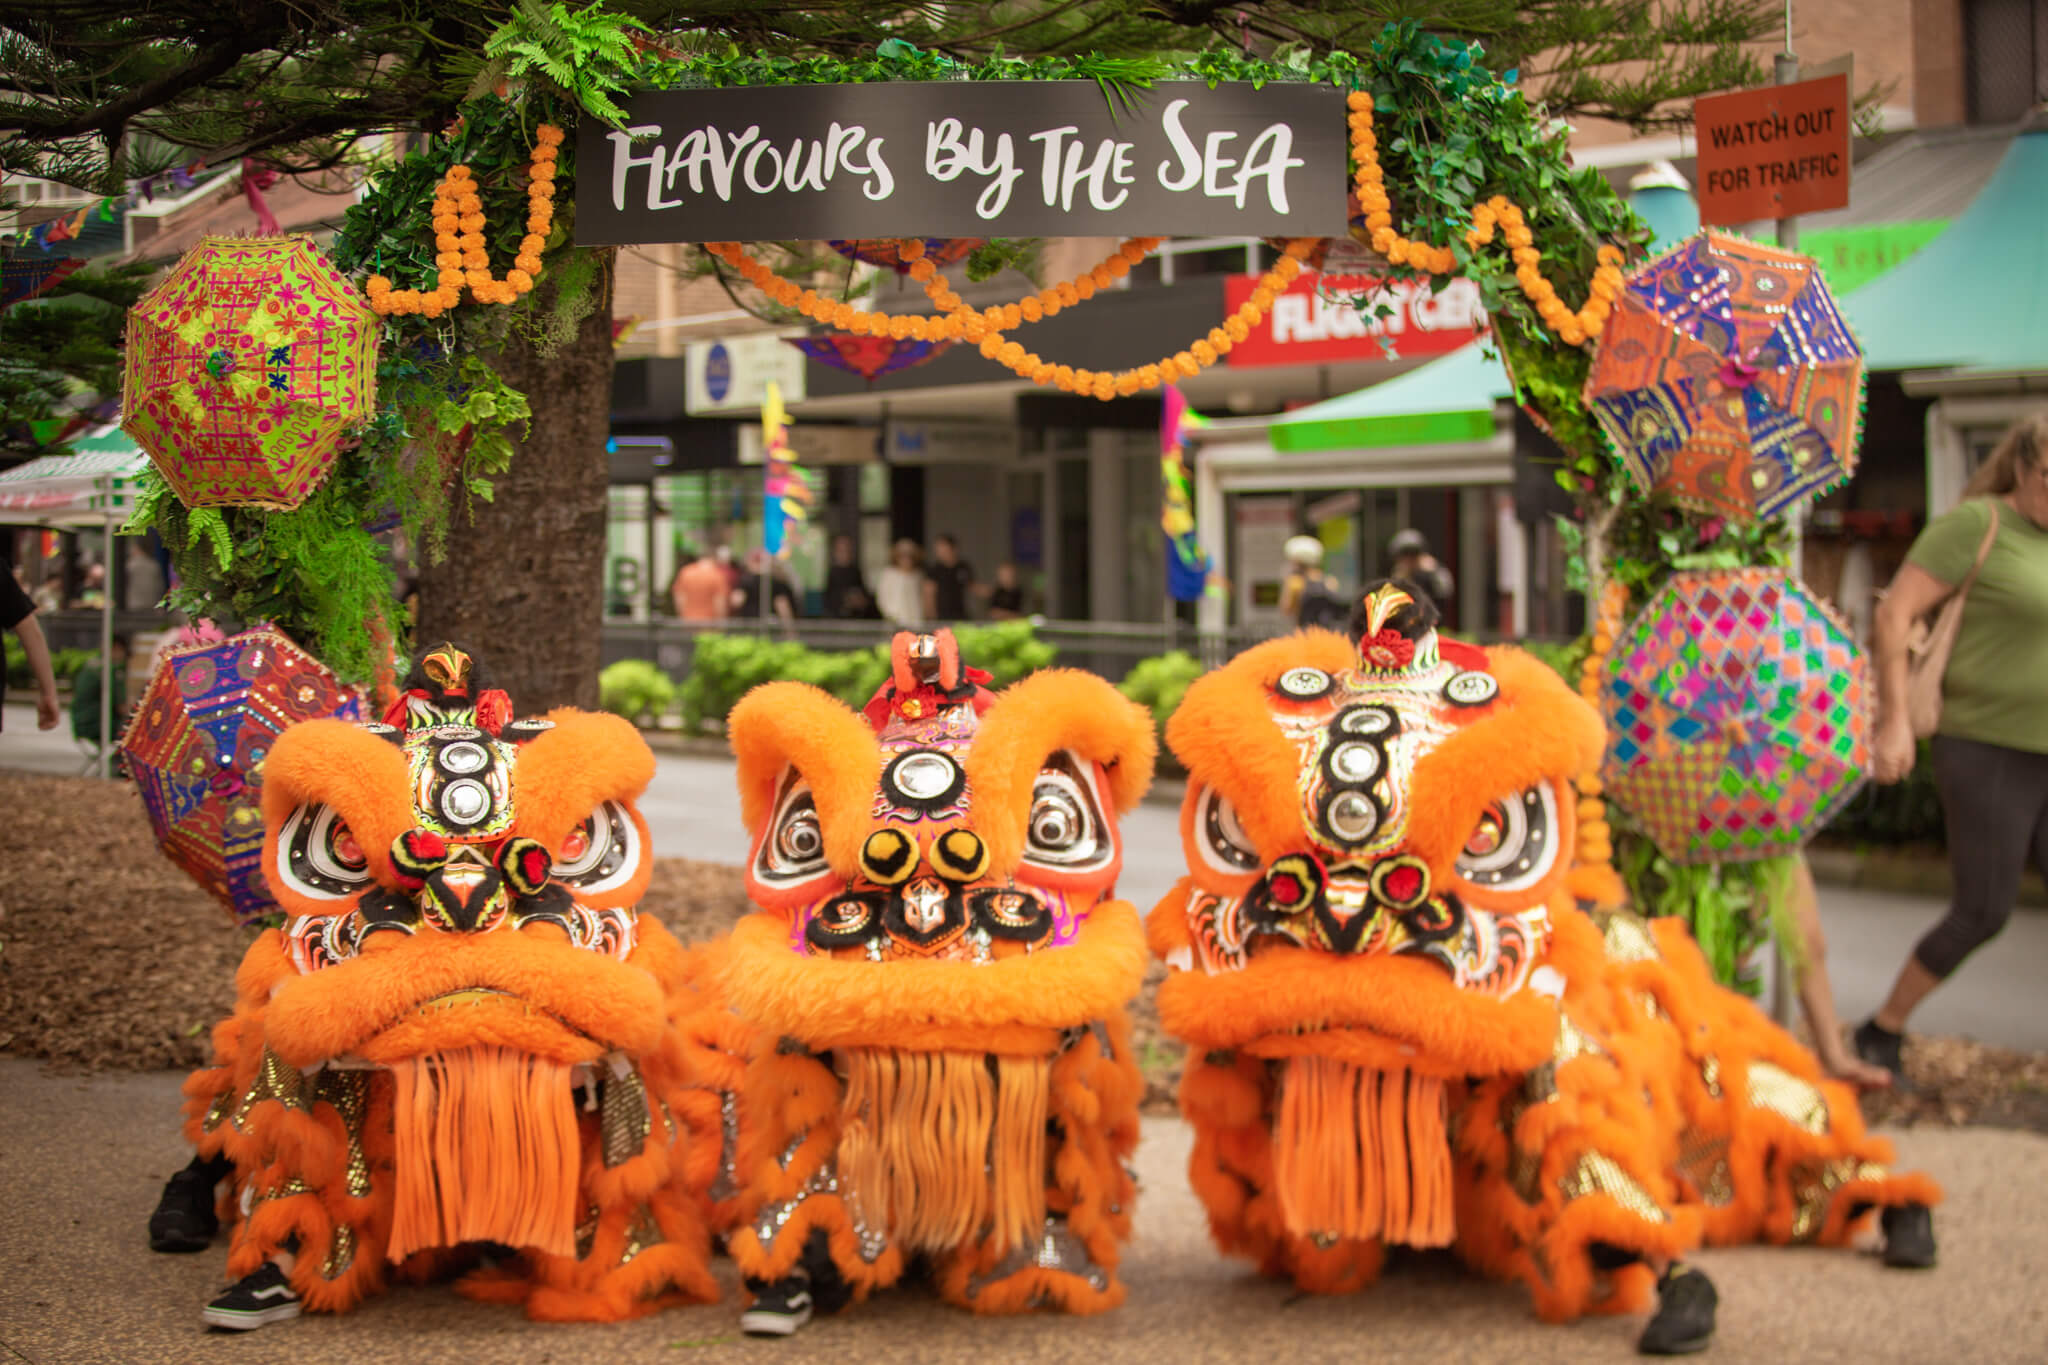 Chinese dragons under Flavours by the Sea banner